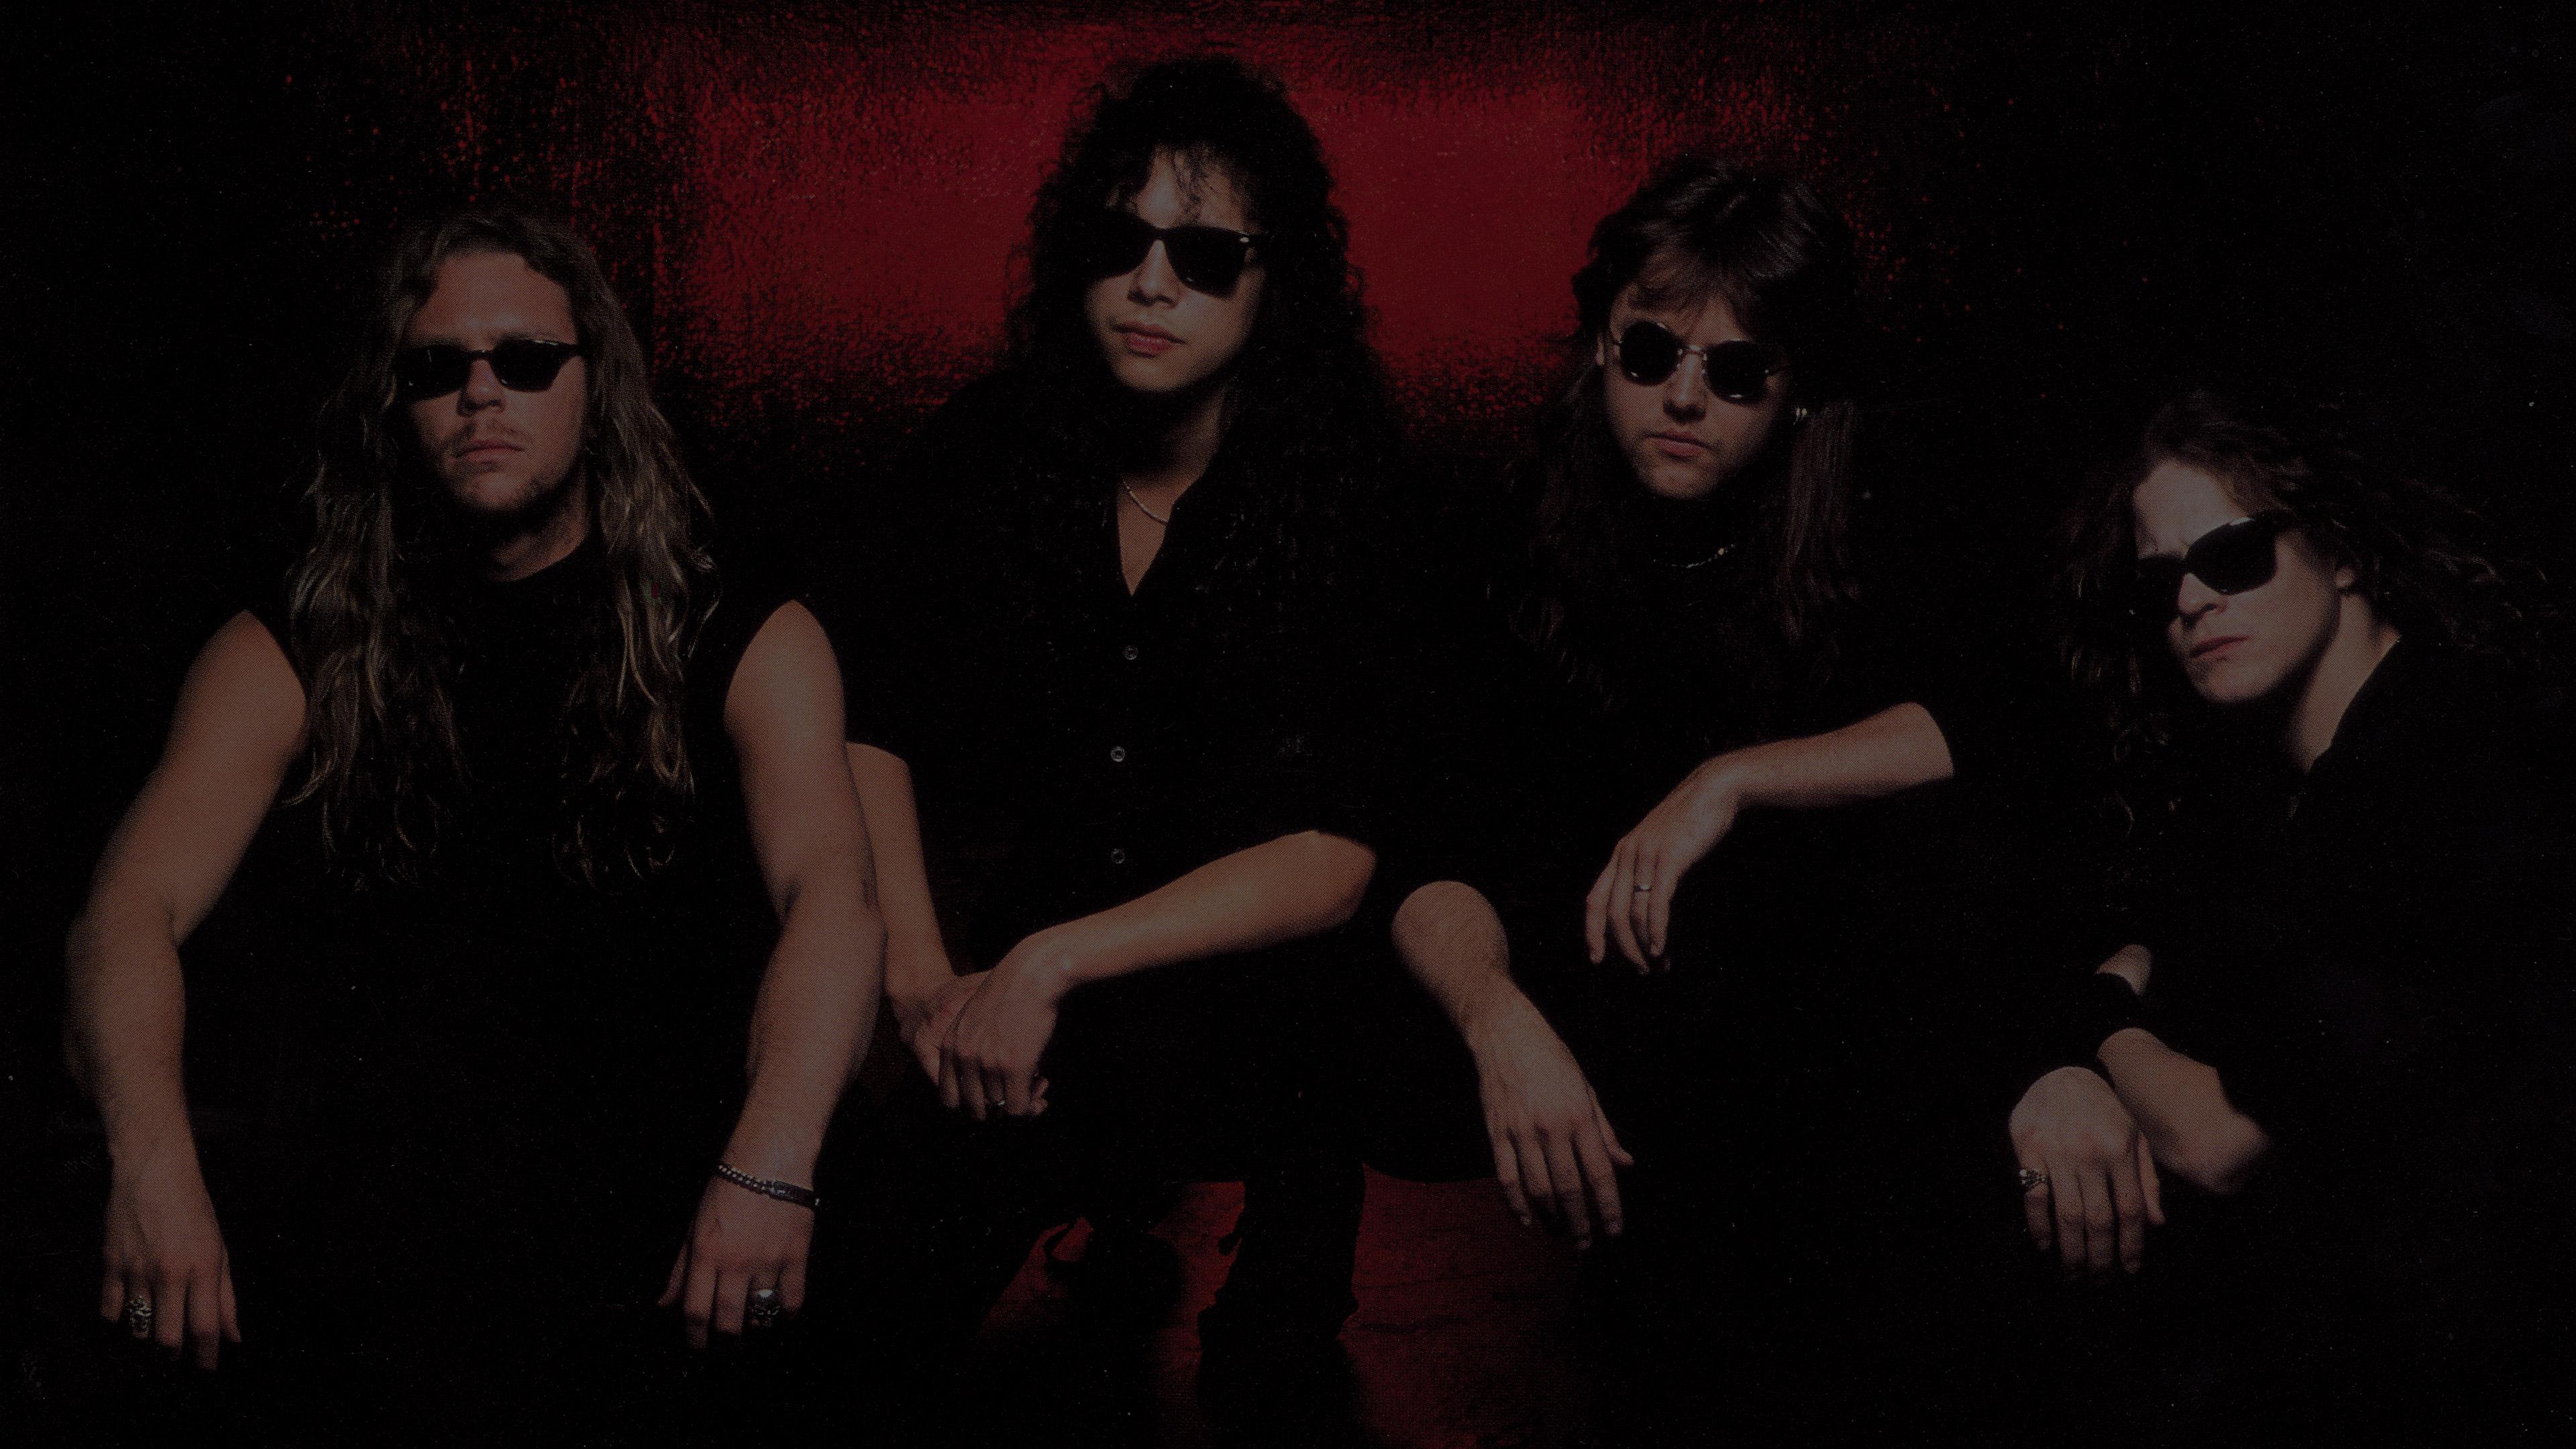 Banner Image for Metallica's Song "To Live is to Die"